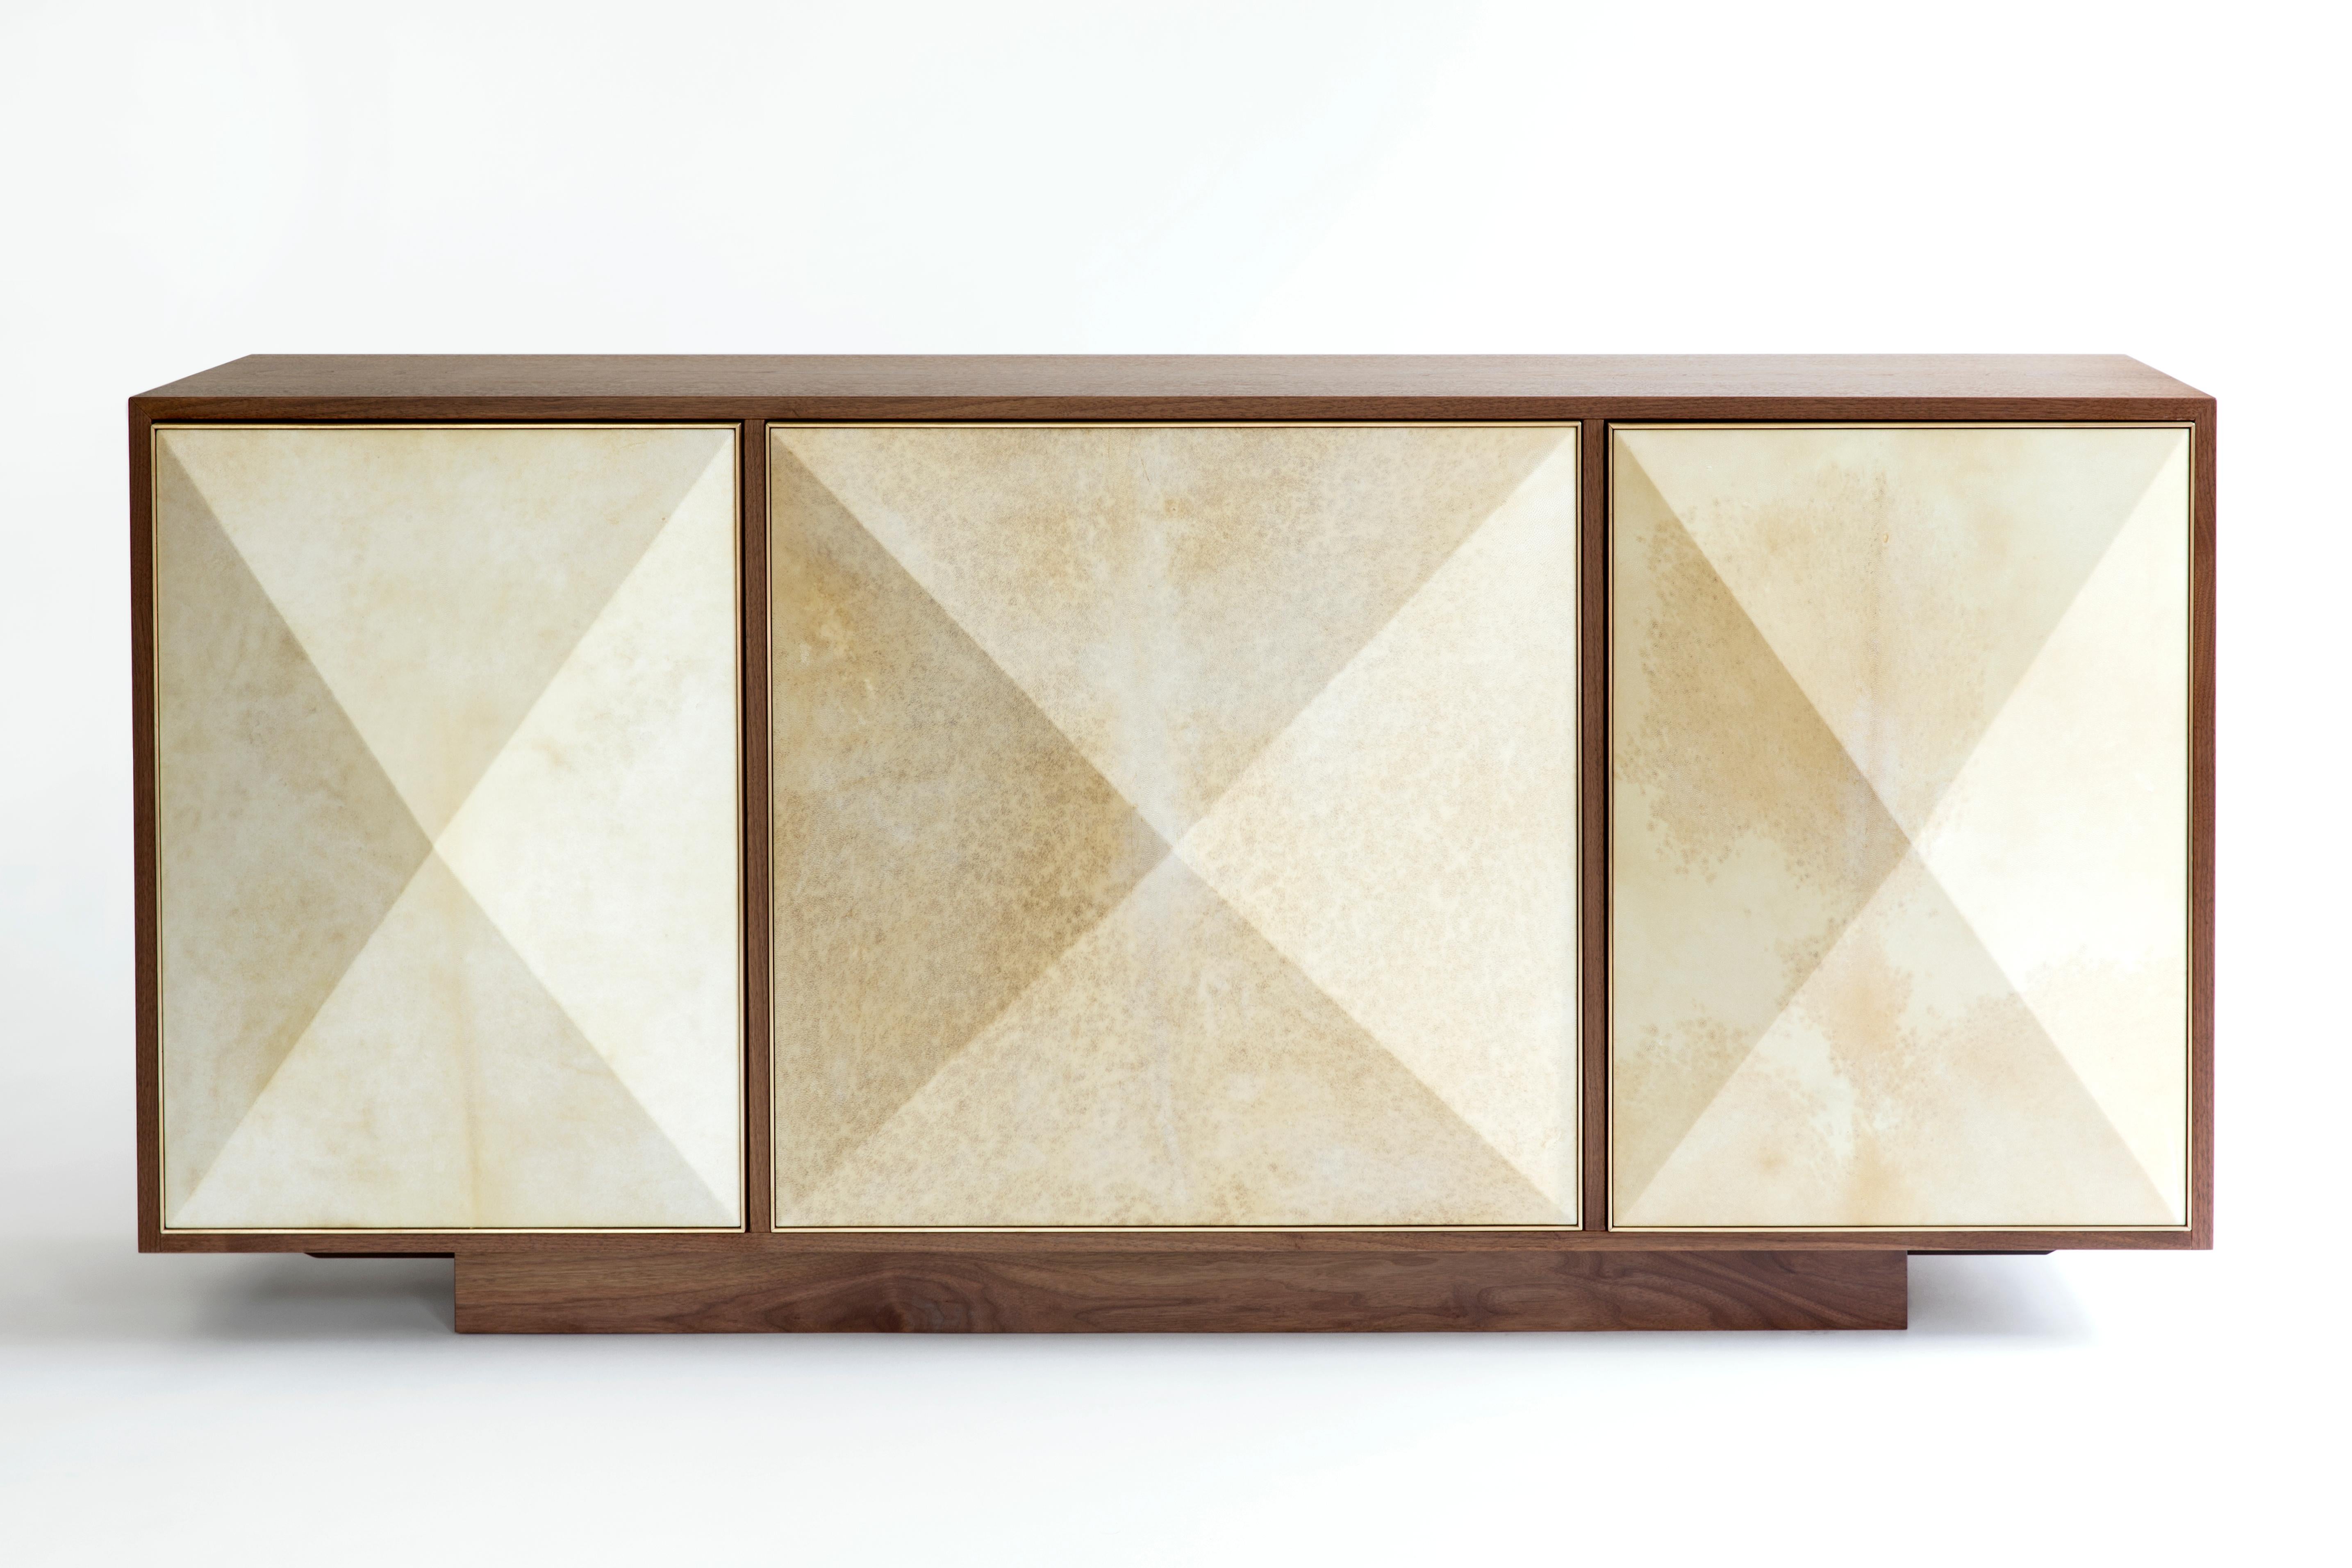 The 3 door Pyramid Sideboard features three three-dimensional doors hand-wrapped in natural goatskin parchment and framed subtly in satin brass. The recessed base gives the piece a floating appearance. The outer doors of the sideboard are slightly